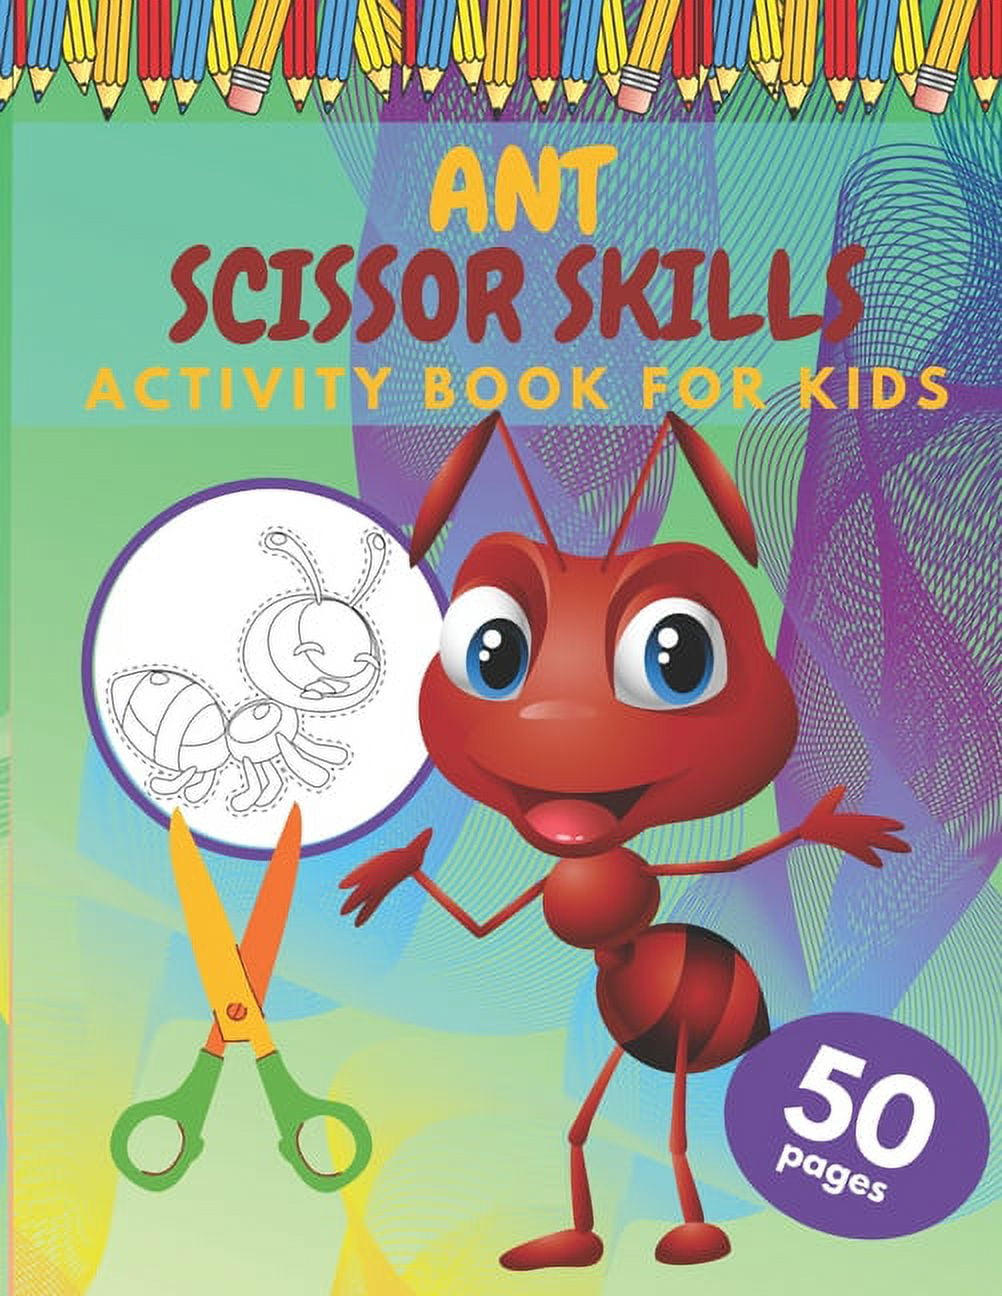 Ant Scissor Skills Activity Book For Kids: COLORING BOOK FOR KIDS SCISSOR  SKILLS 4-8 Age Size (8,5x11 inches) 50 Full Page Of Cute Ant (Paperback) 